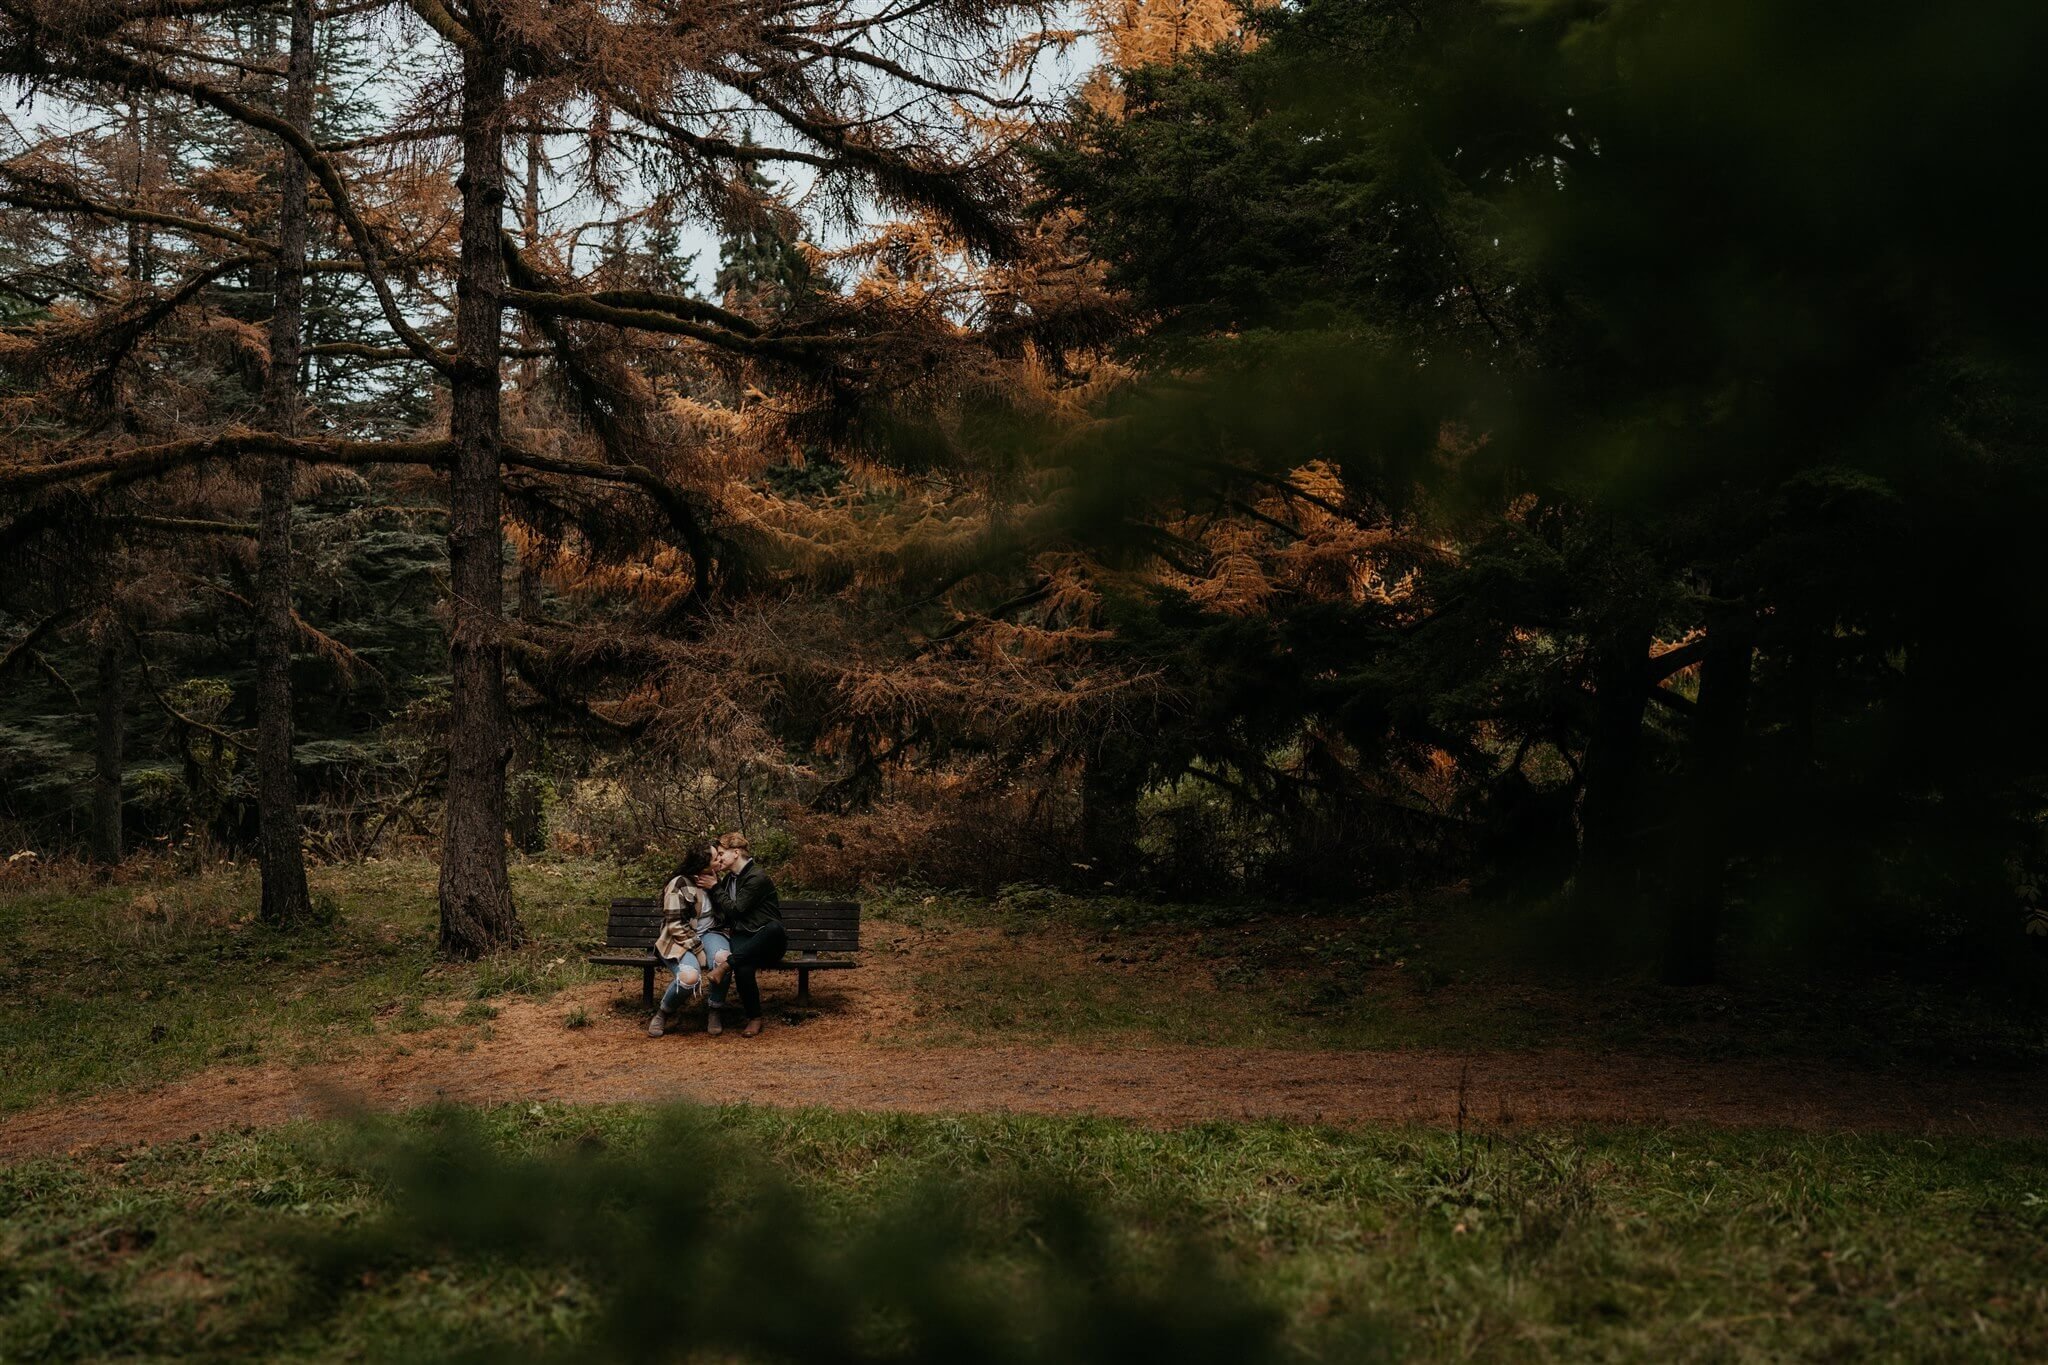 Couple kissing on a bench in the forest